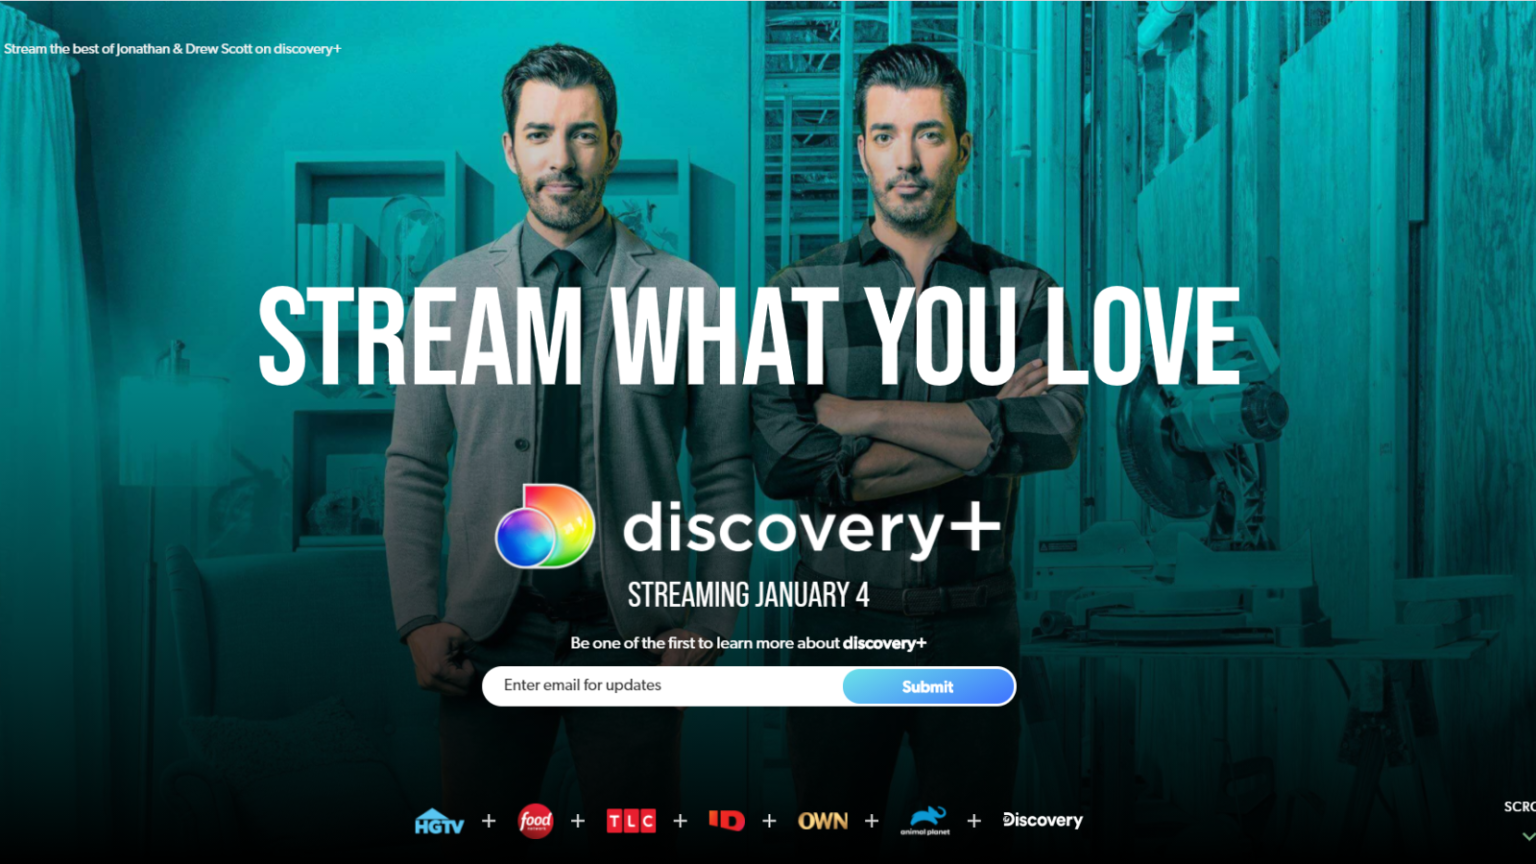 cost of discovery plus